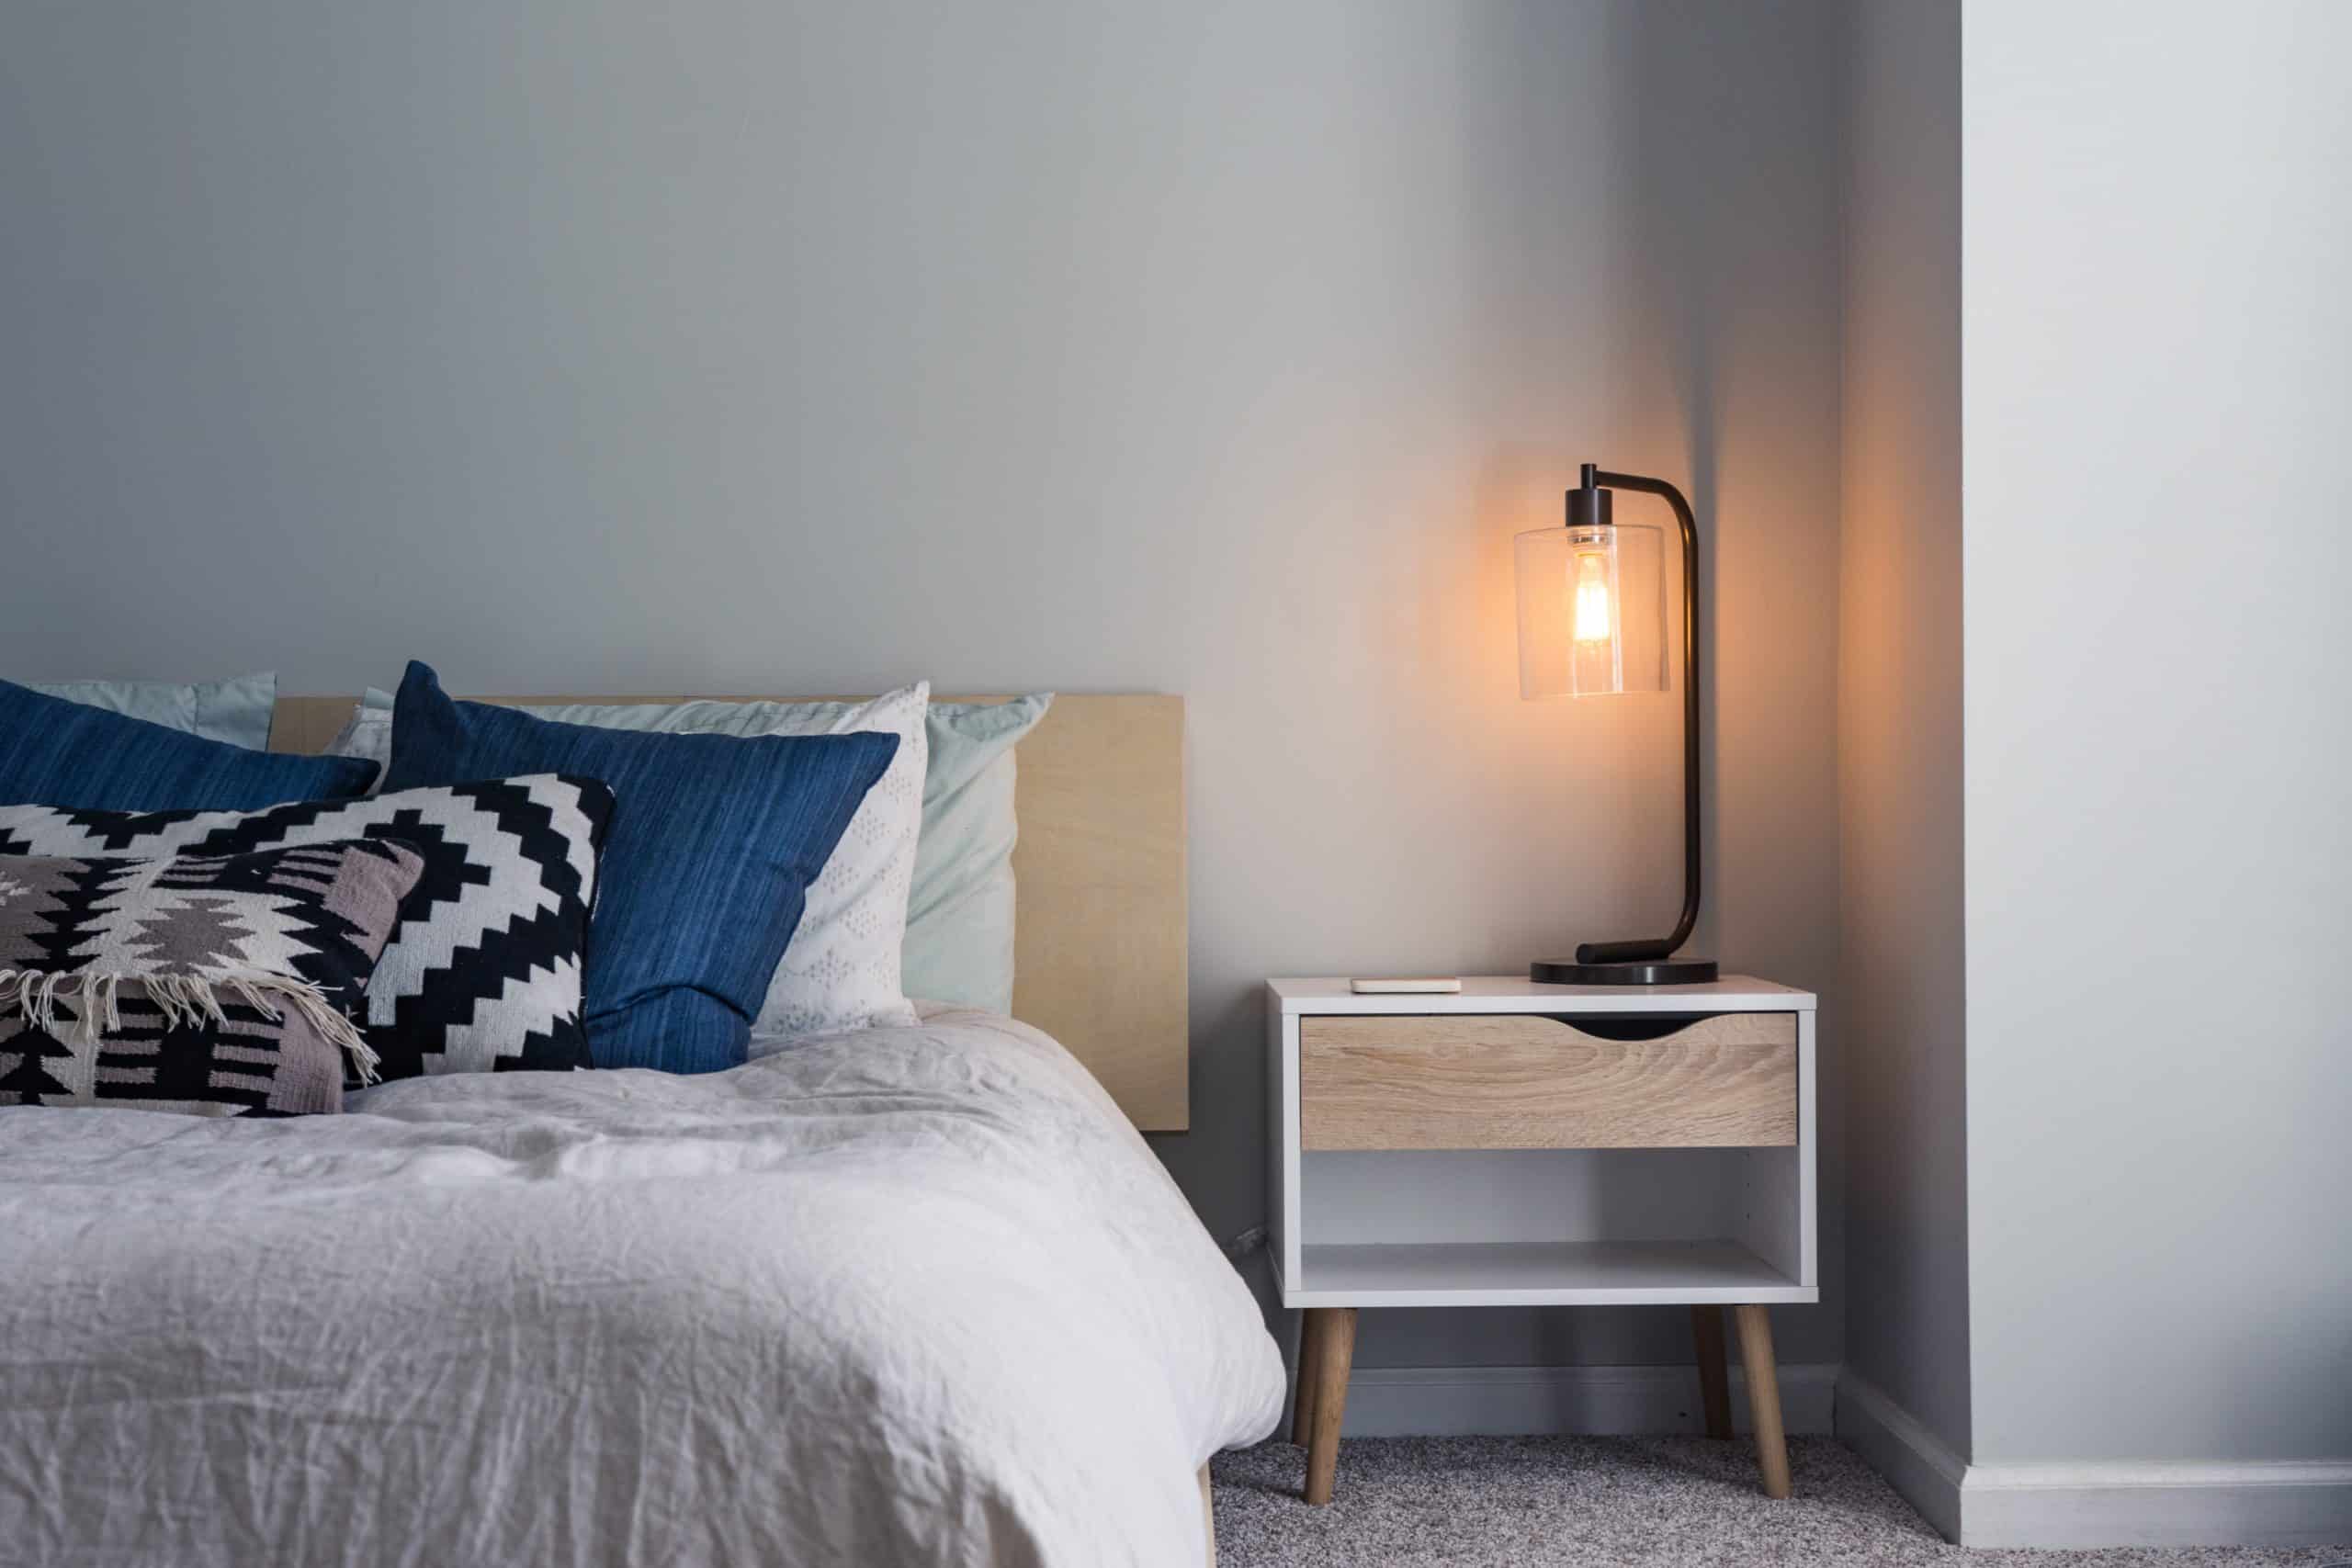 How To Use Light In Small Spaces 